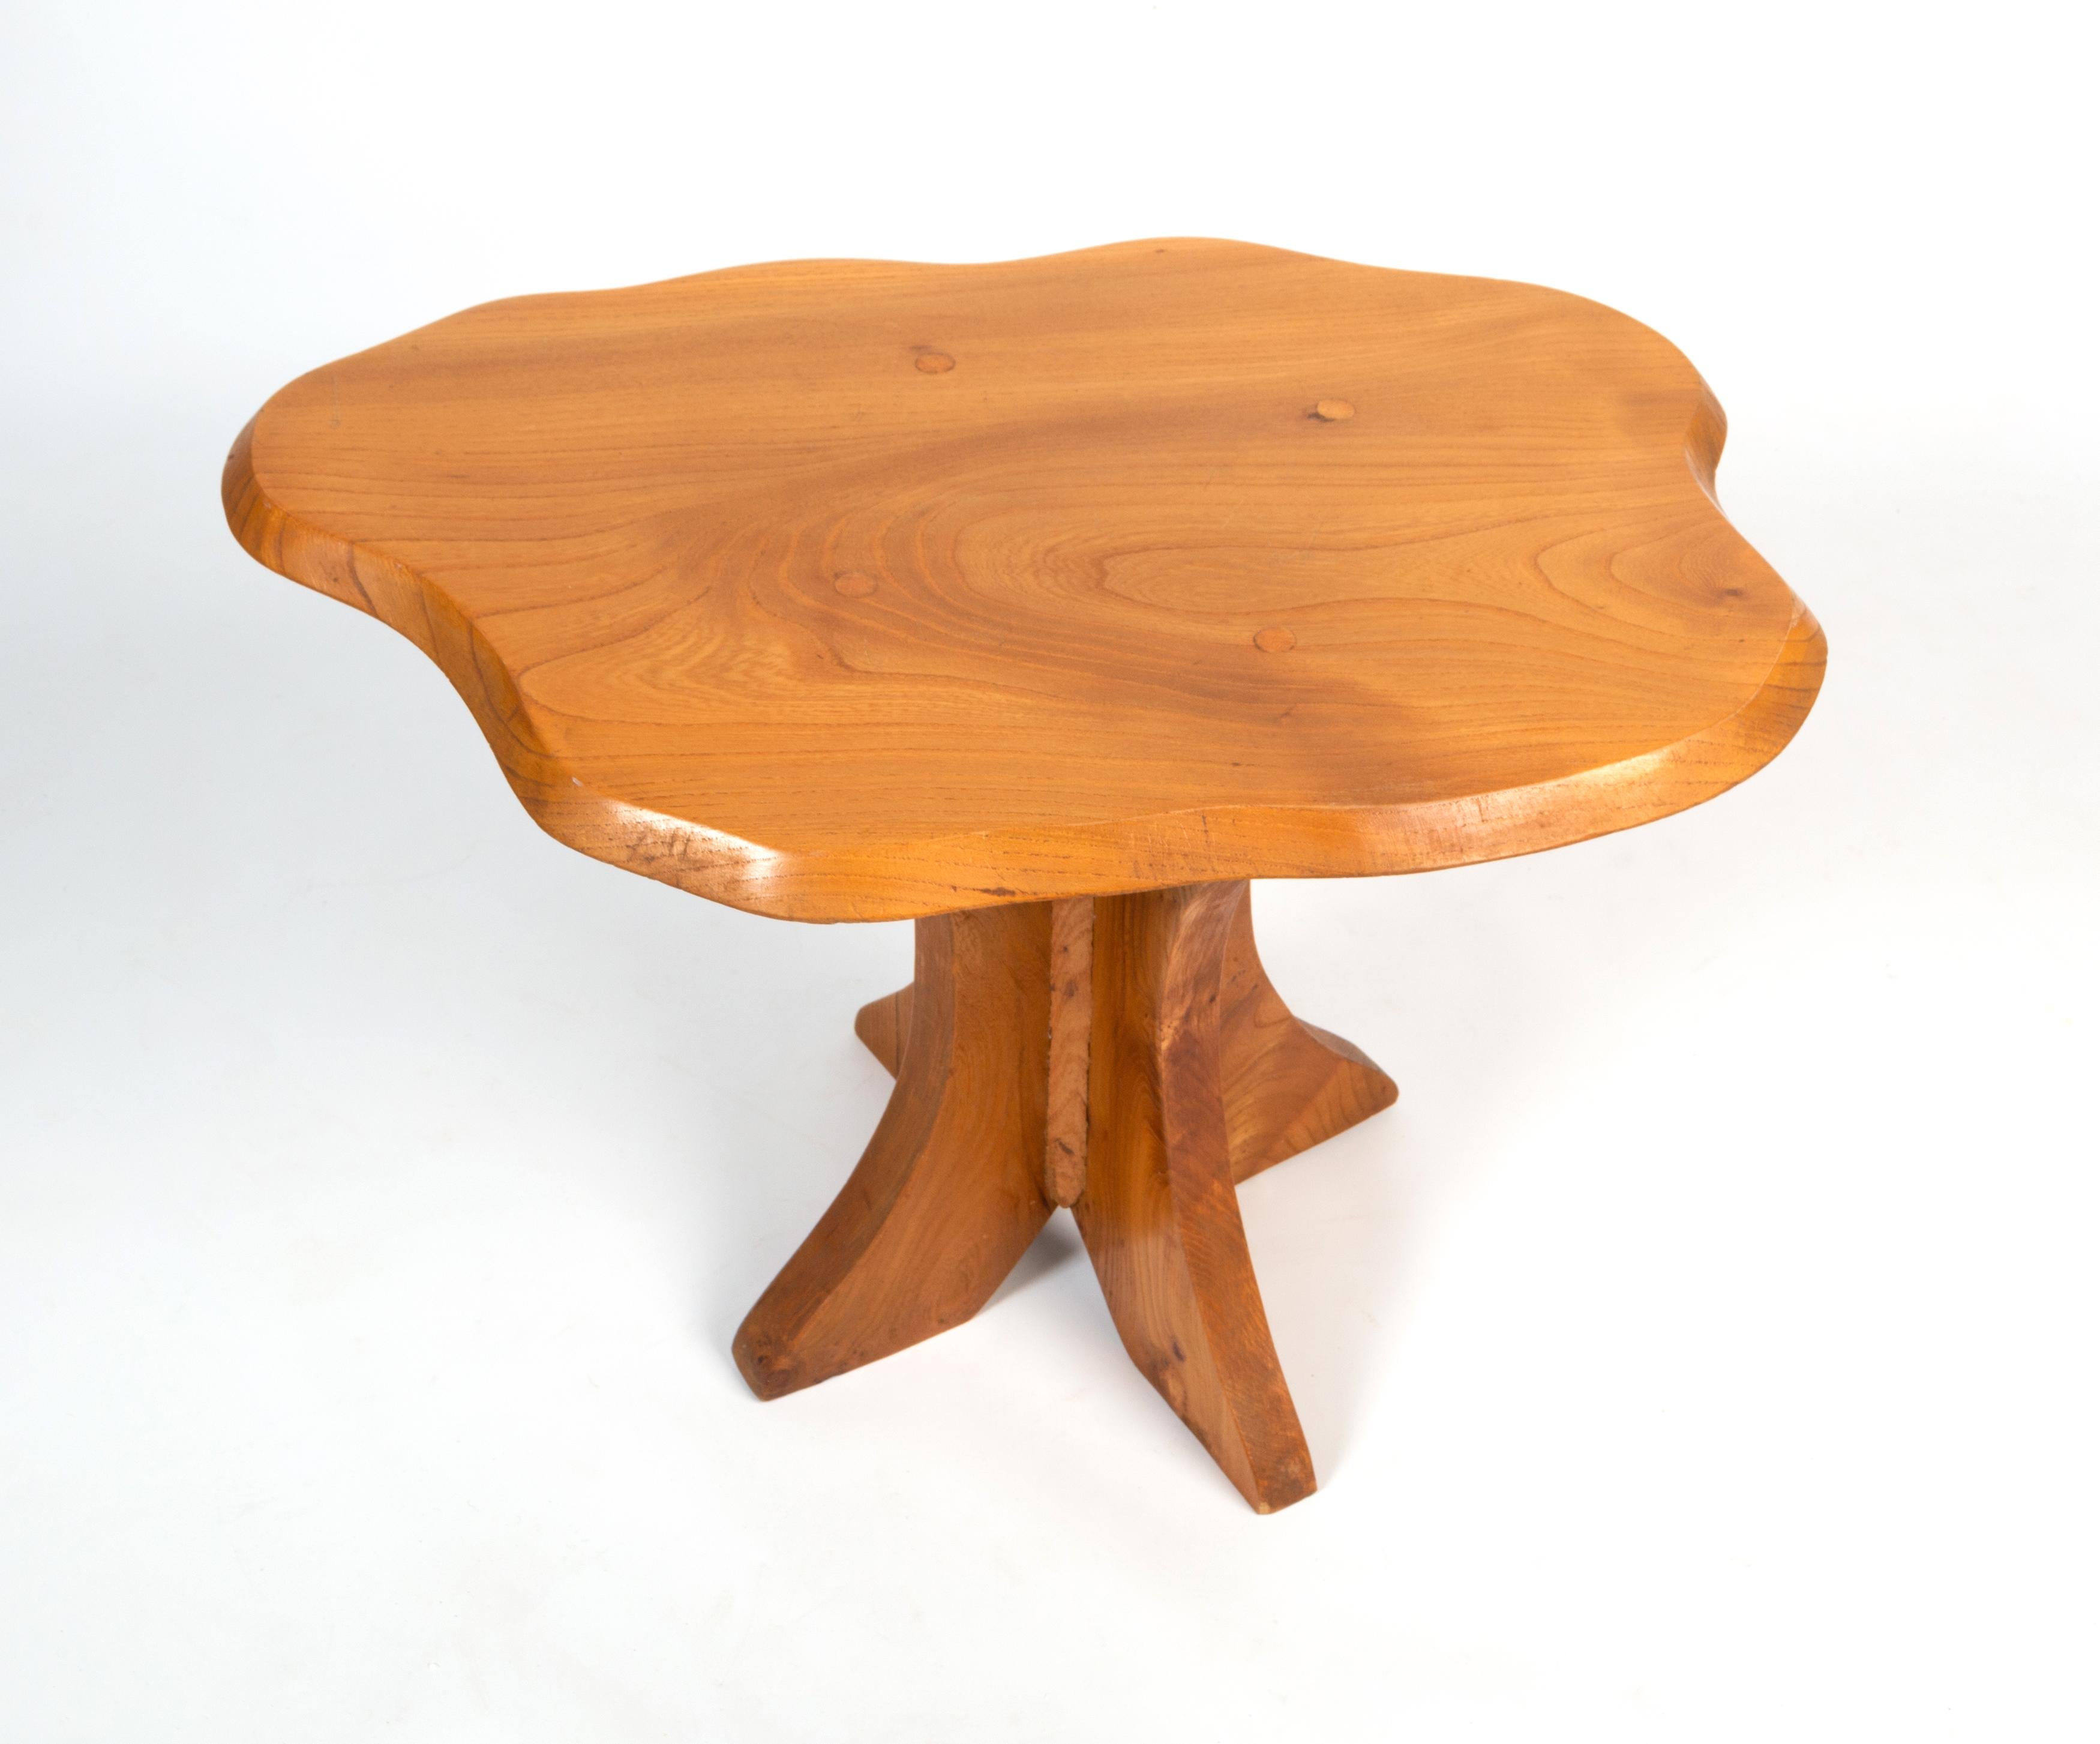 Midcentury Brutalist Yew Wood Sculptural Side Table England, circa 1970 For Sale 1